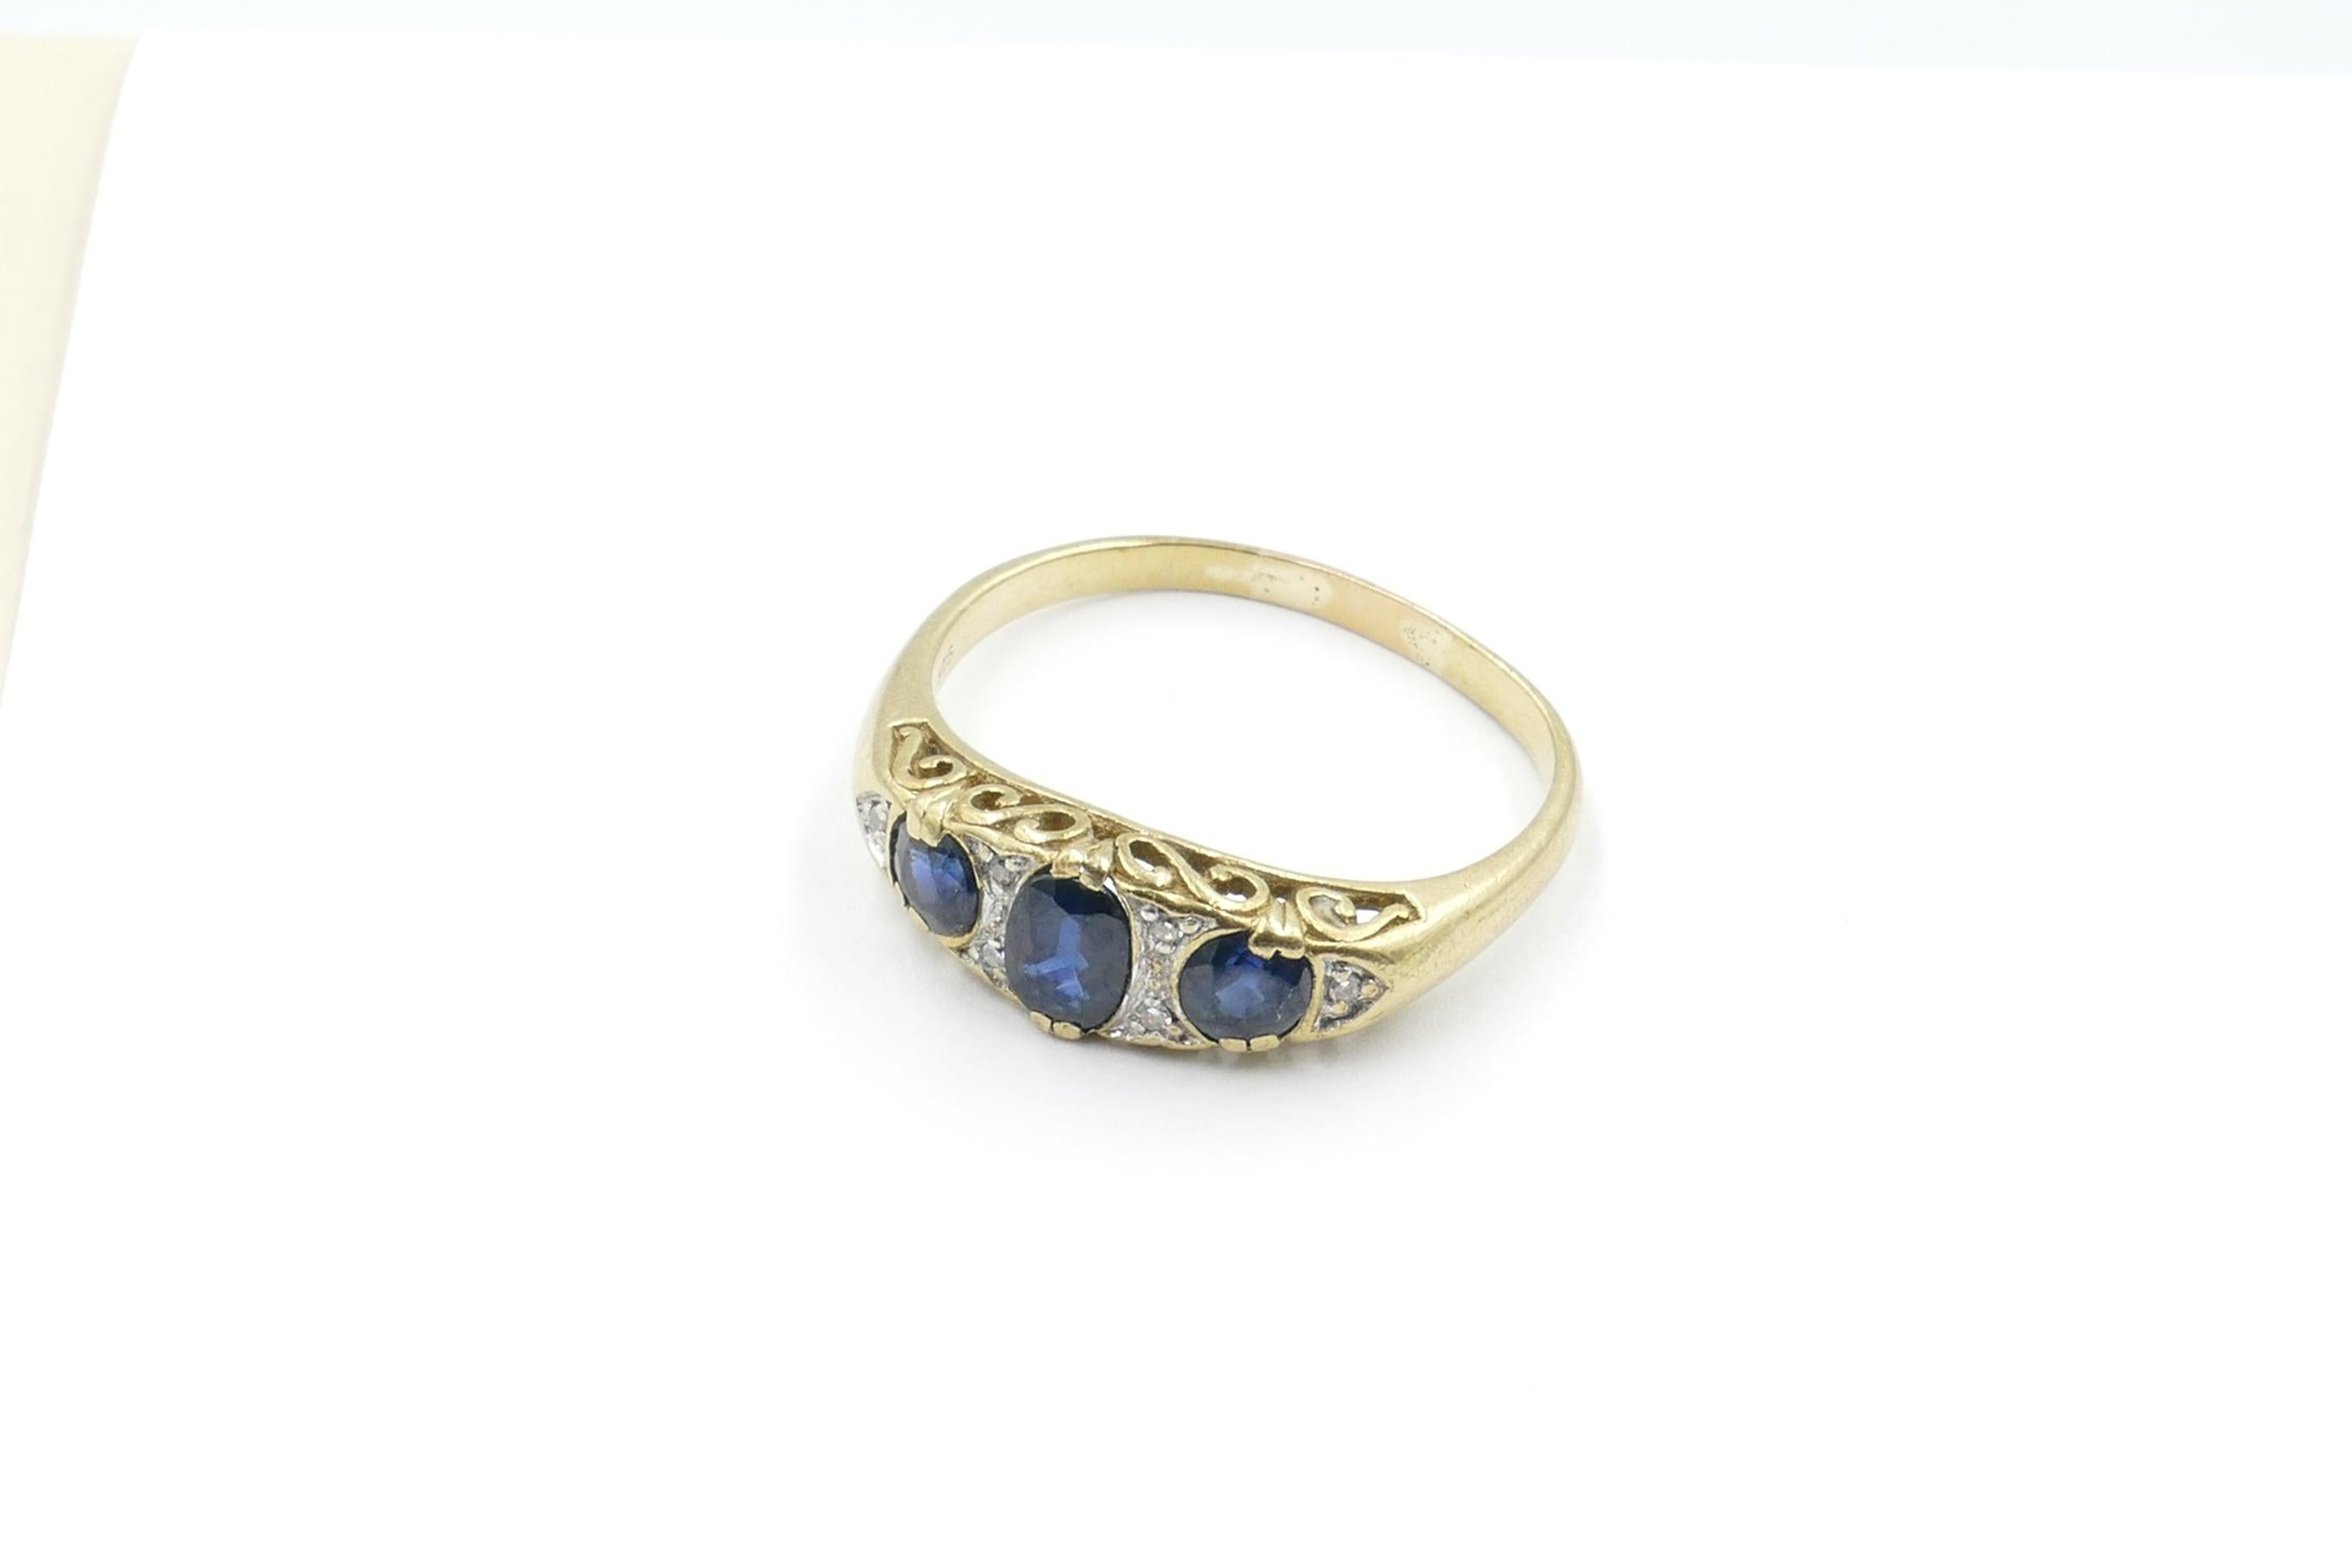 This beautiful, well preserved Late Victorian Ring consists of 3 deep blue Sapphires, Clarity eye-clean, Oval Cut, Claw Set, along with 6 Round Brilliant Cut Diamonds, Grain Set over White Gold, Colour J-K.
The Band is polished, half round, reverse